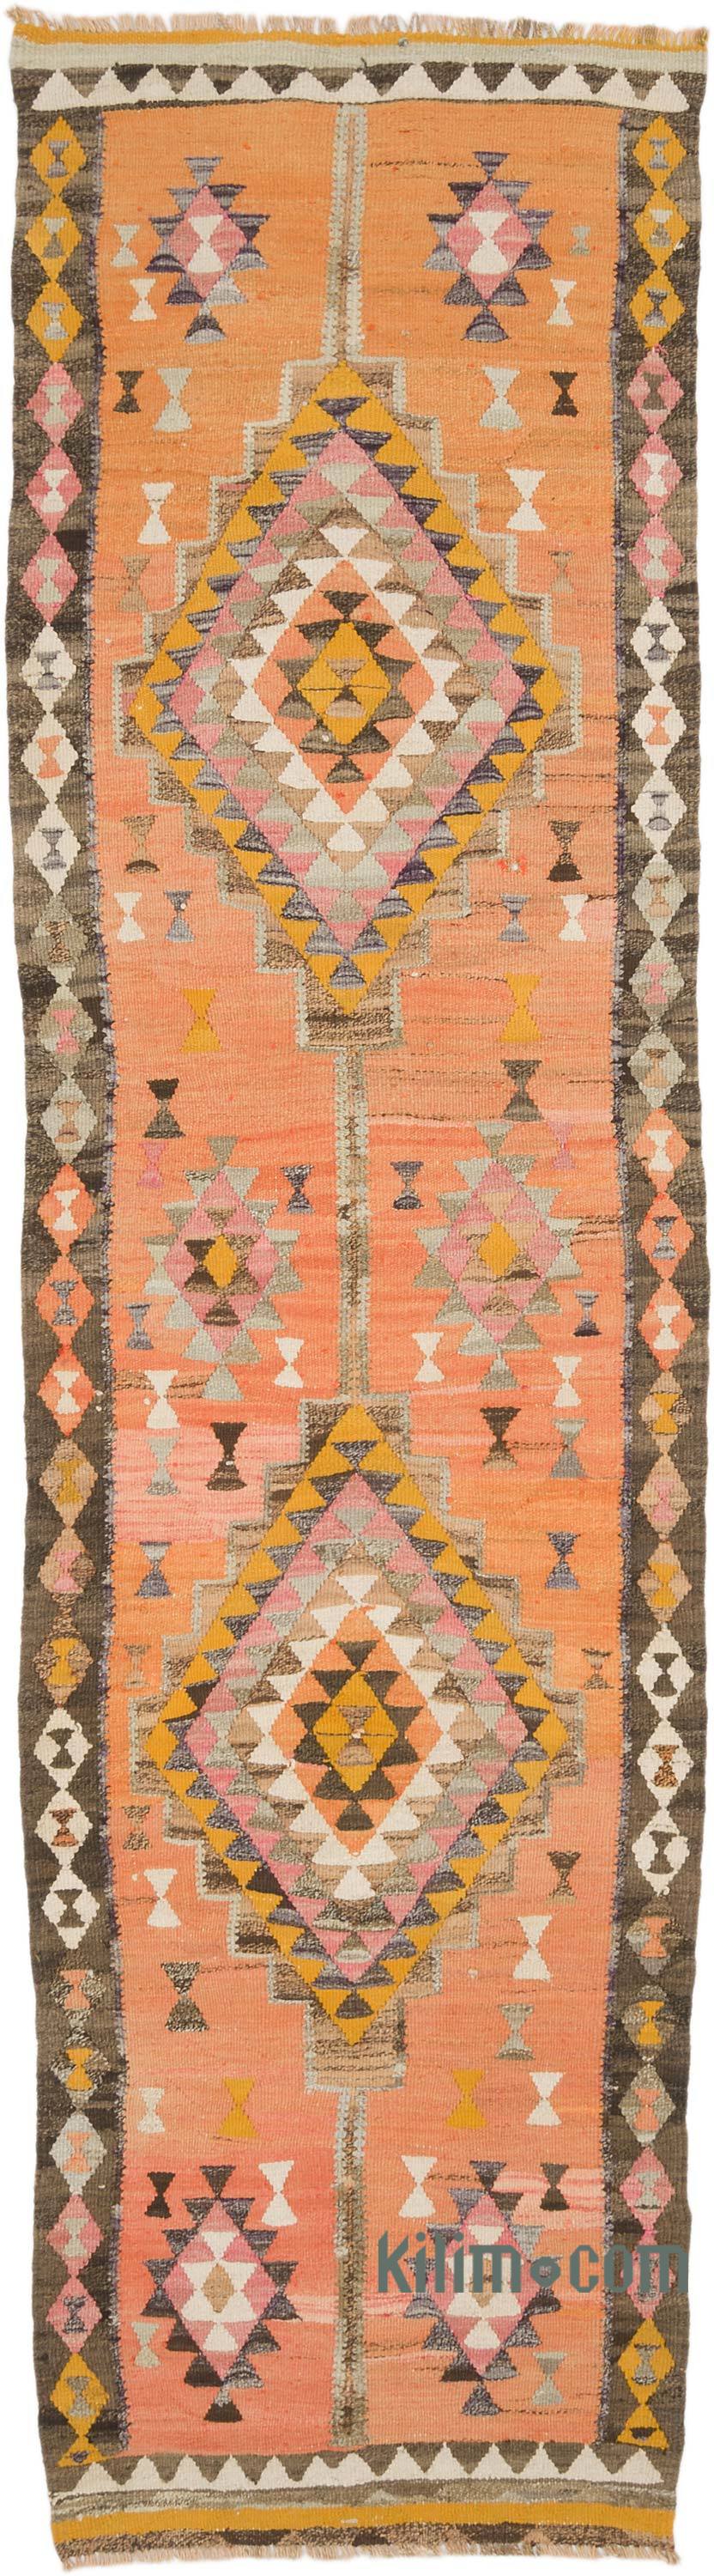 K0056902 New Handwoven Turkish Kilim Rug - 3' 3 x 4' 9 (39 x 57)  The  Source for Vintage Rugs, Tribal Kilim Rugs, Wool Turkish Rugs, Overdyed  Persian Rugs, Runner Rugs